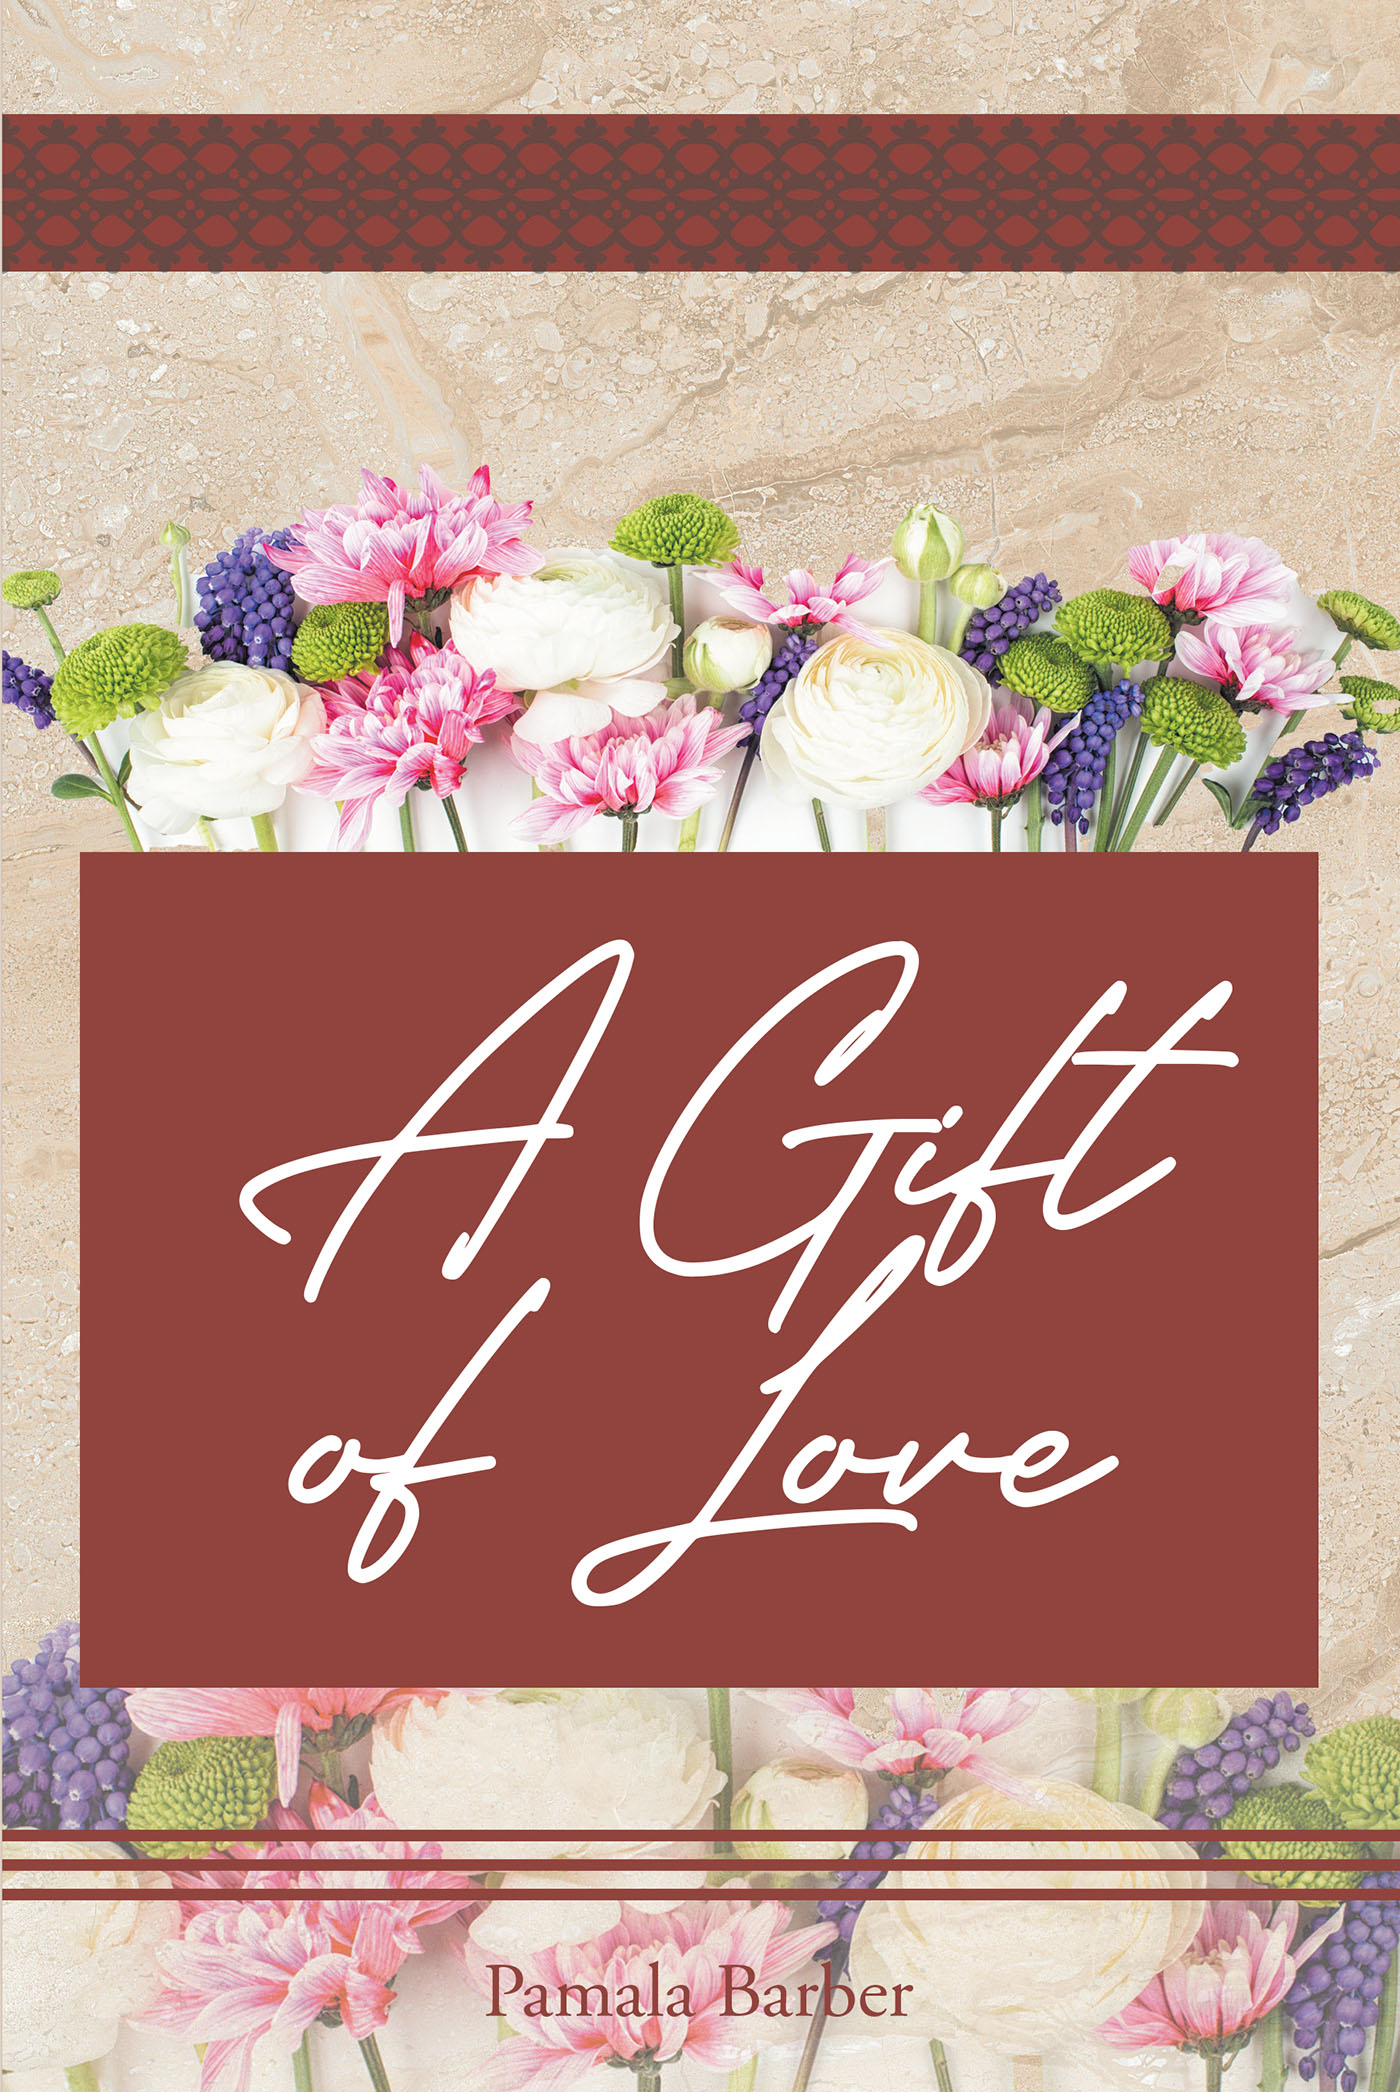 Pamala Barber’s Newly Released "A Gift of Love" is a Warmhearted Message of Encouragement and God’s Love